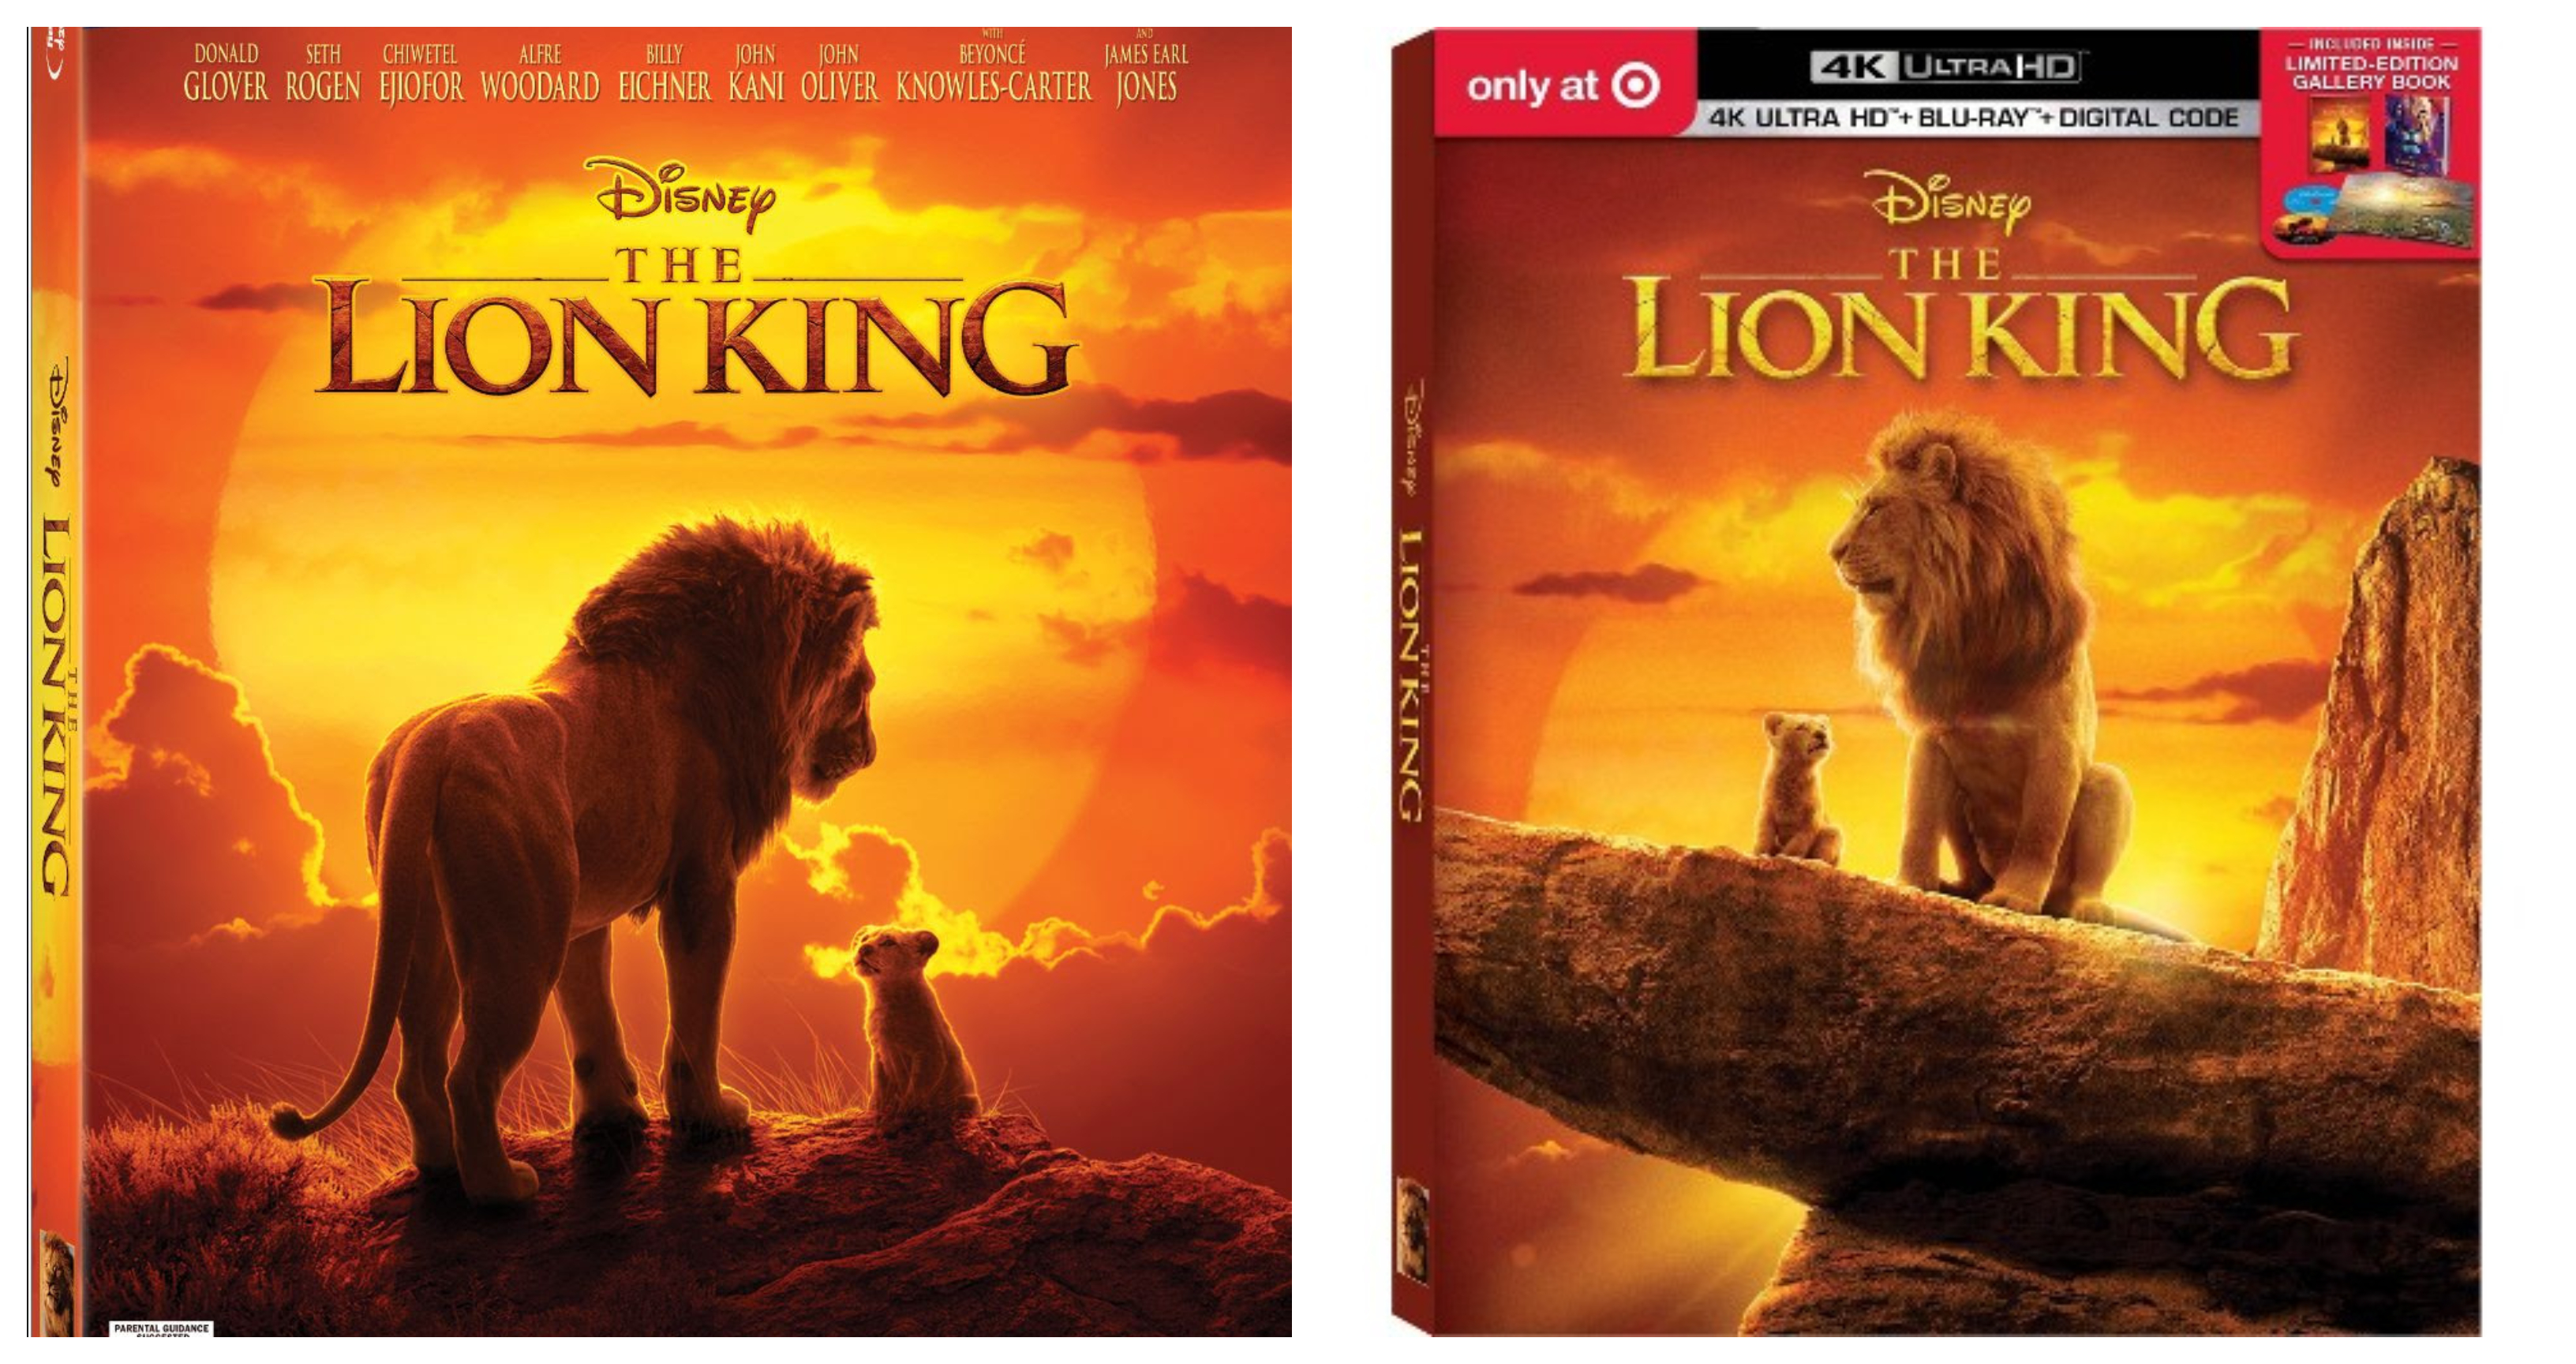 Disney’s The Lion King Arrives on Digital & Bluray this October!